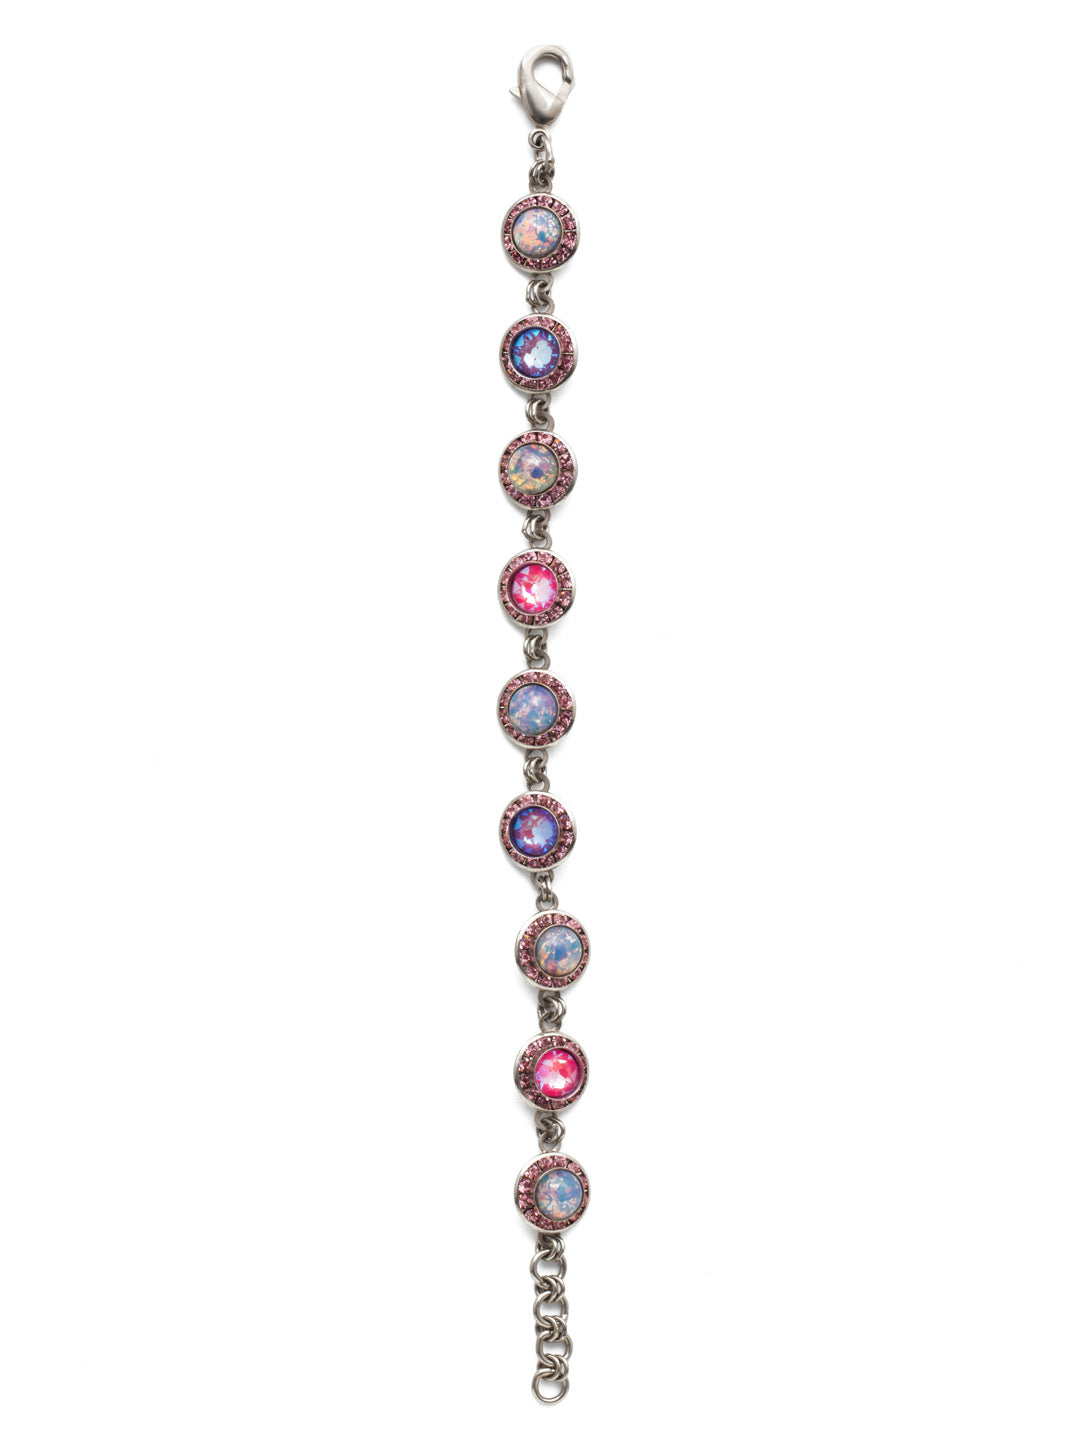 Wilfred Tennis Bracelet - BET15ASETP - Ooze glamour when you wrap your wrist in the Wilfred Tennis Bracelet. Its evenly spaced sparkling crystals (rimmed in even more sparkle!) shine bright. From Sorrelli's Electric Pink collection in our Antique Silver-tone finish.